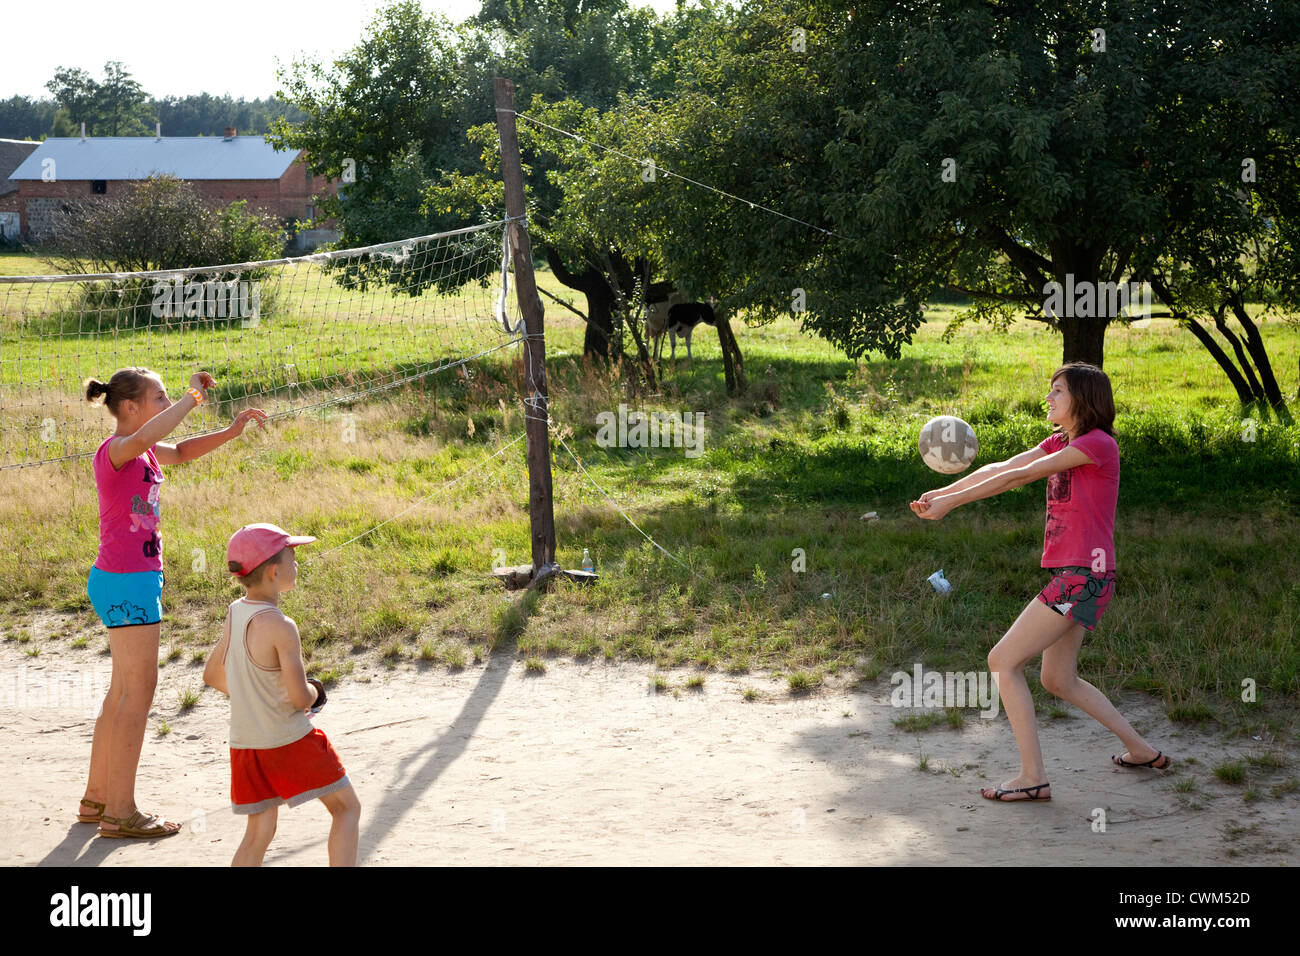 Teens and children playing volleyball in village sandlot course. Mala Wola Central Poland Stock Photo